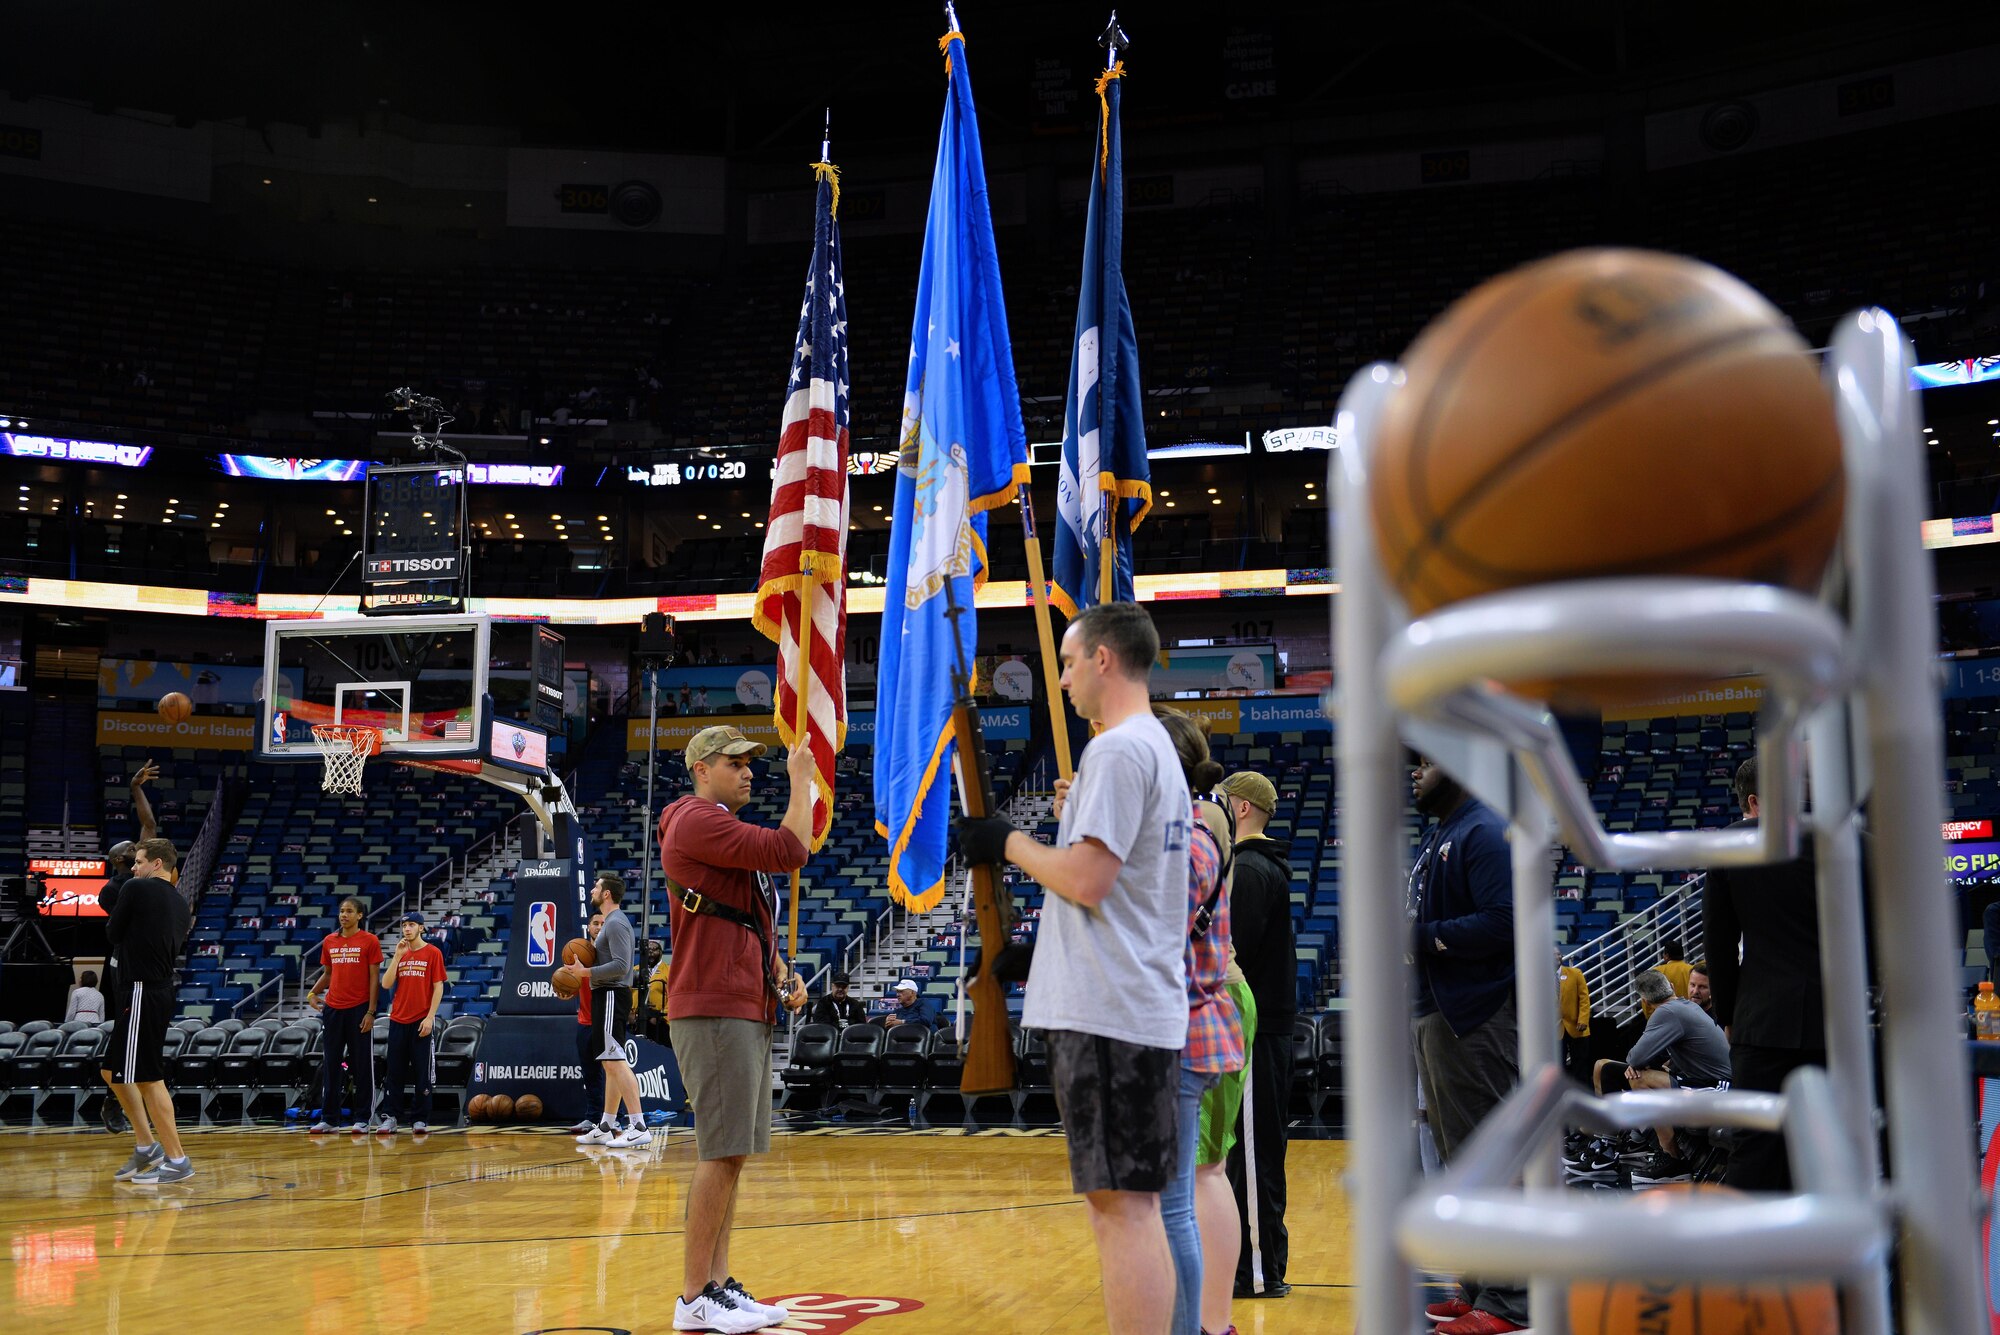 Keesler Honor Guard members practice their routine before a New Orleans Pelicans NBA game at the Smoothie King Center, March 3, 2017, in New Orleans. The Keesler Honor Guard posted the colors prior to the game. The Keesler Honor Guard performs hundreds of ceremonial details across Louisiana and Mississippi each year, including funerals, ceremonies, sporting events and parades. (U.S. Air Force photo by Senior Airman Duncan McElroy)